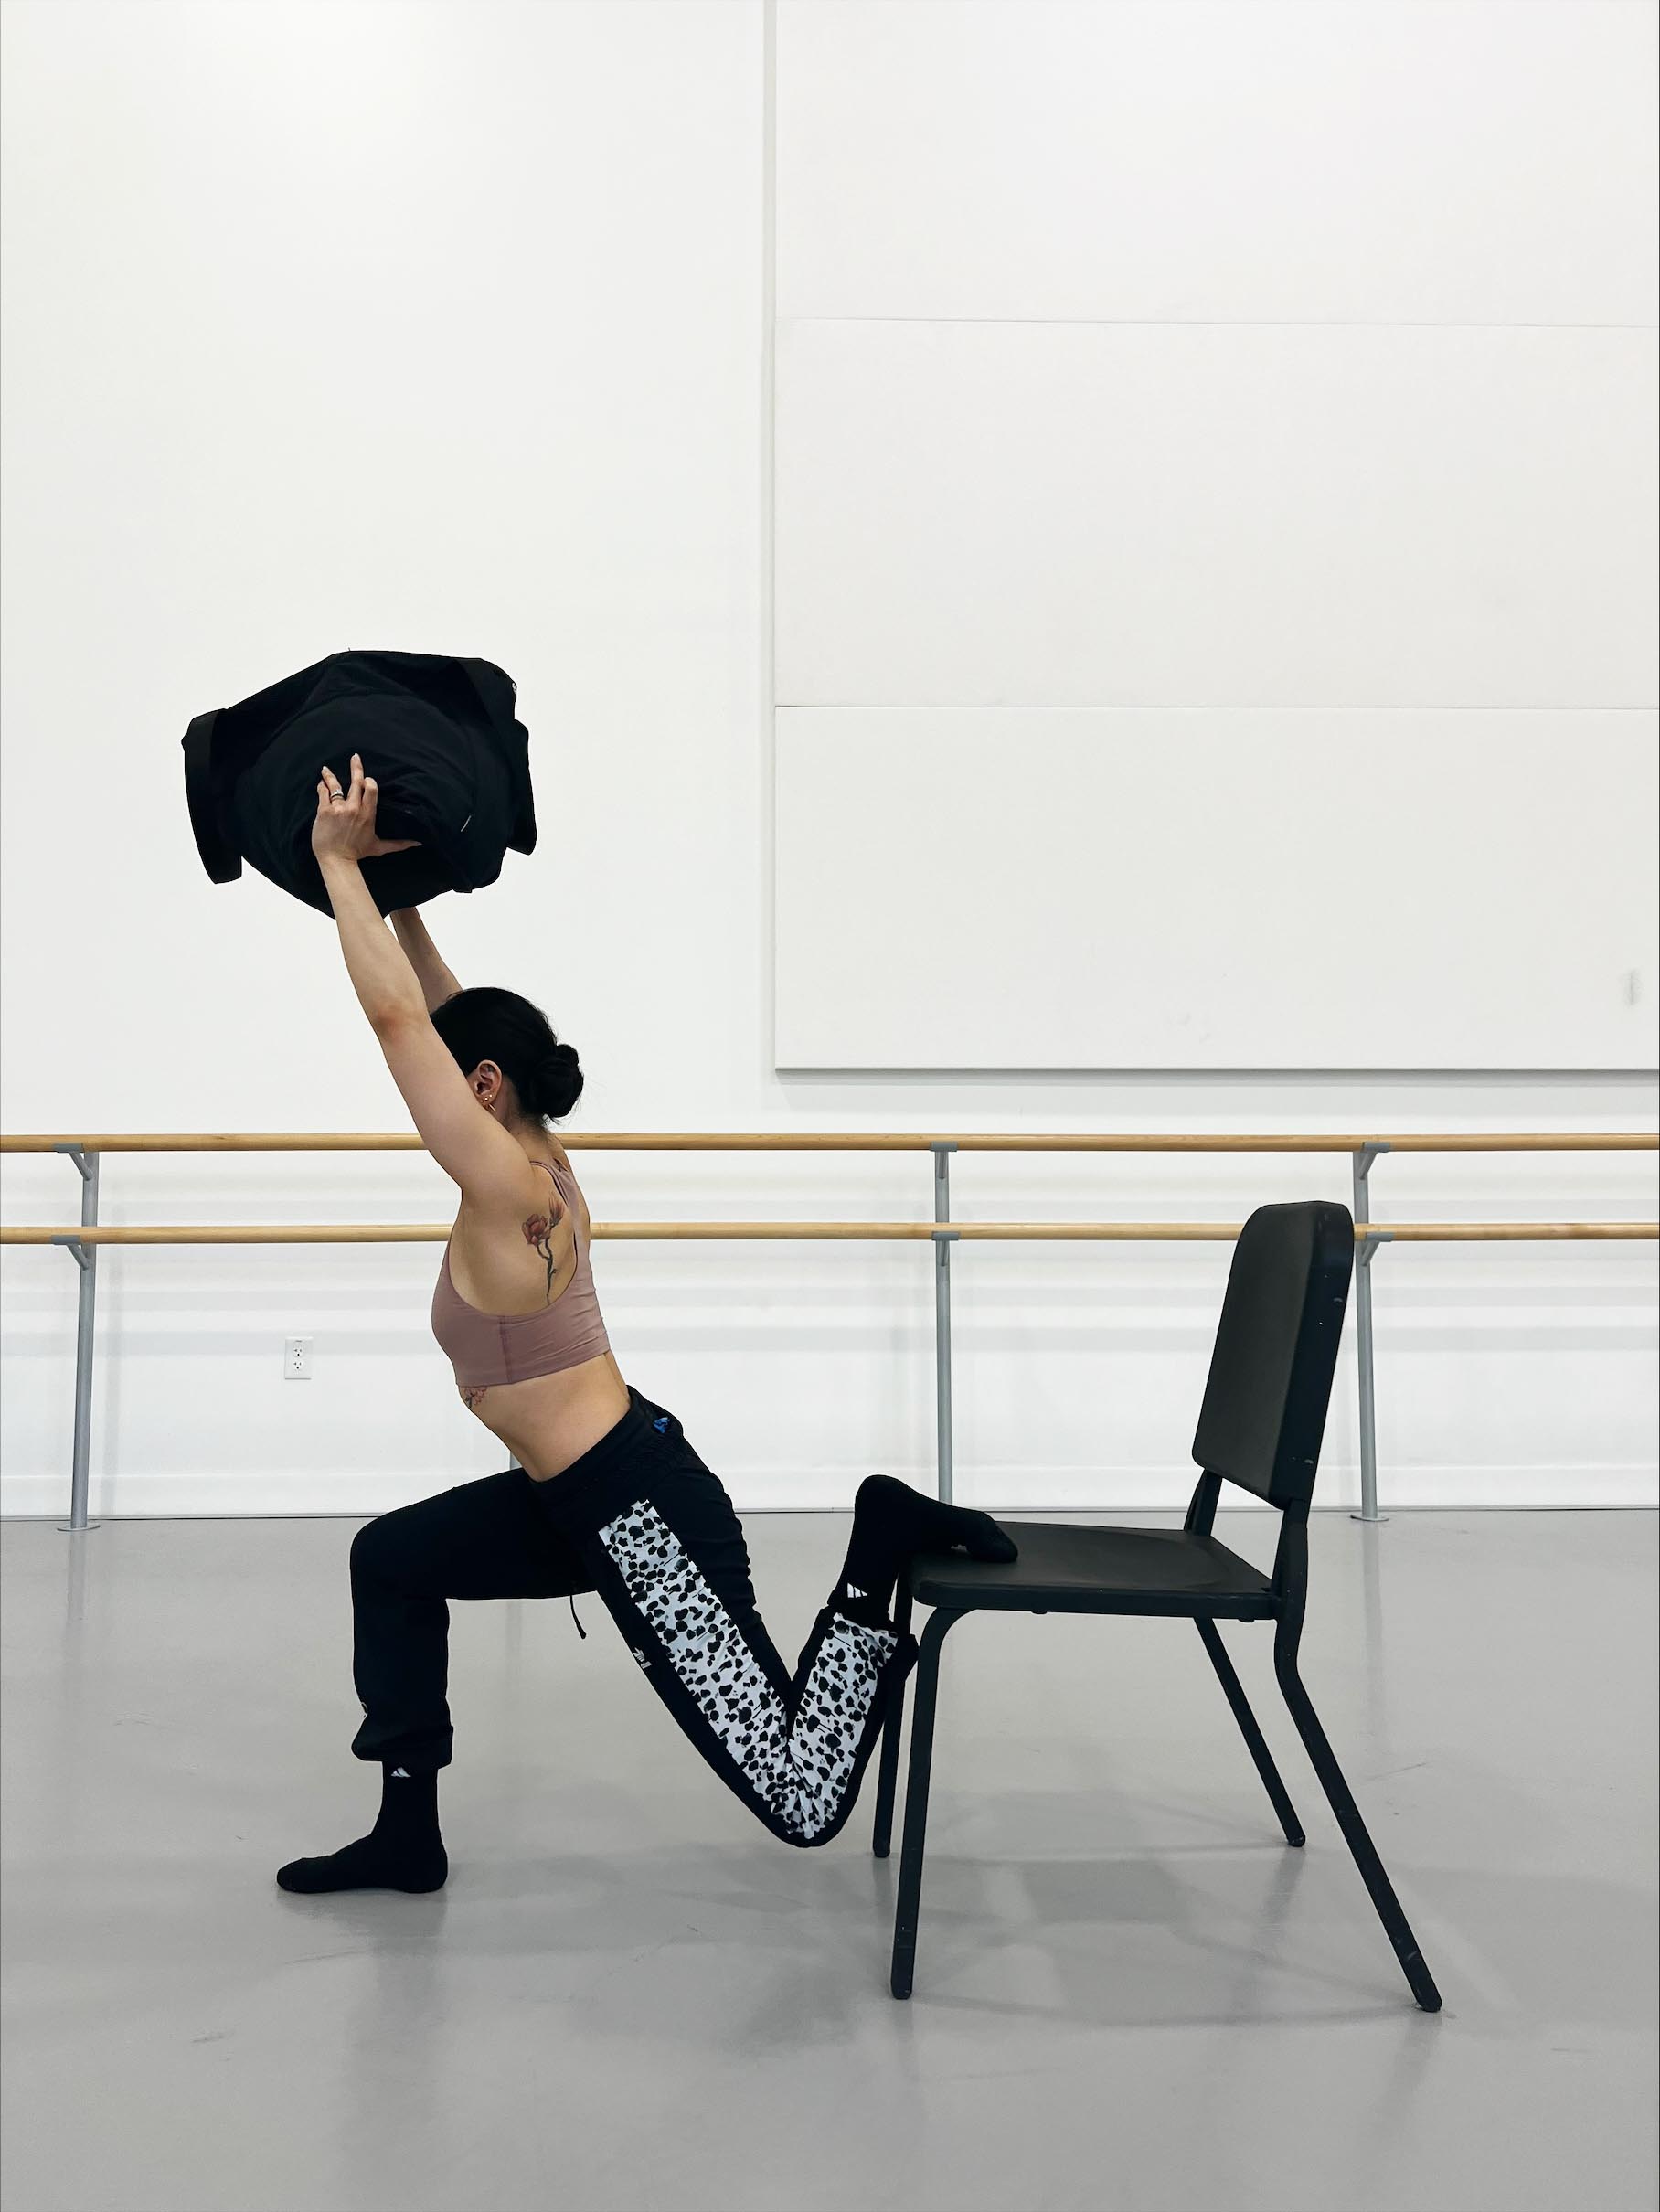 Minori Sakita, wearing a brown sports bra, black workout pants and black socks, stands in front of a black chair and places the top of her left foot on the seat. She squats down on her right leg, wit her left leg bent behind her. She holds up a black bag above her head.